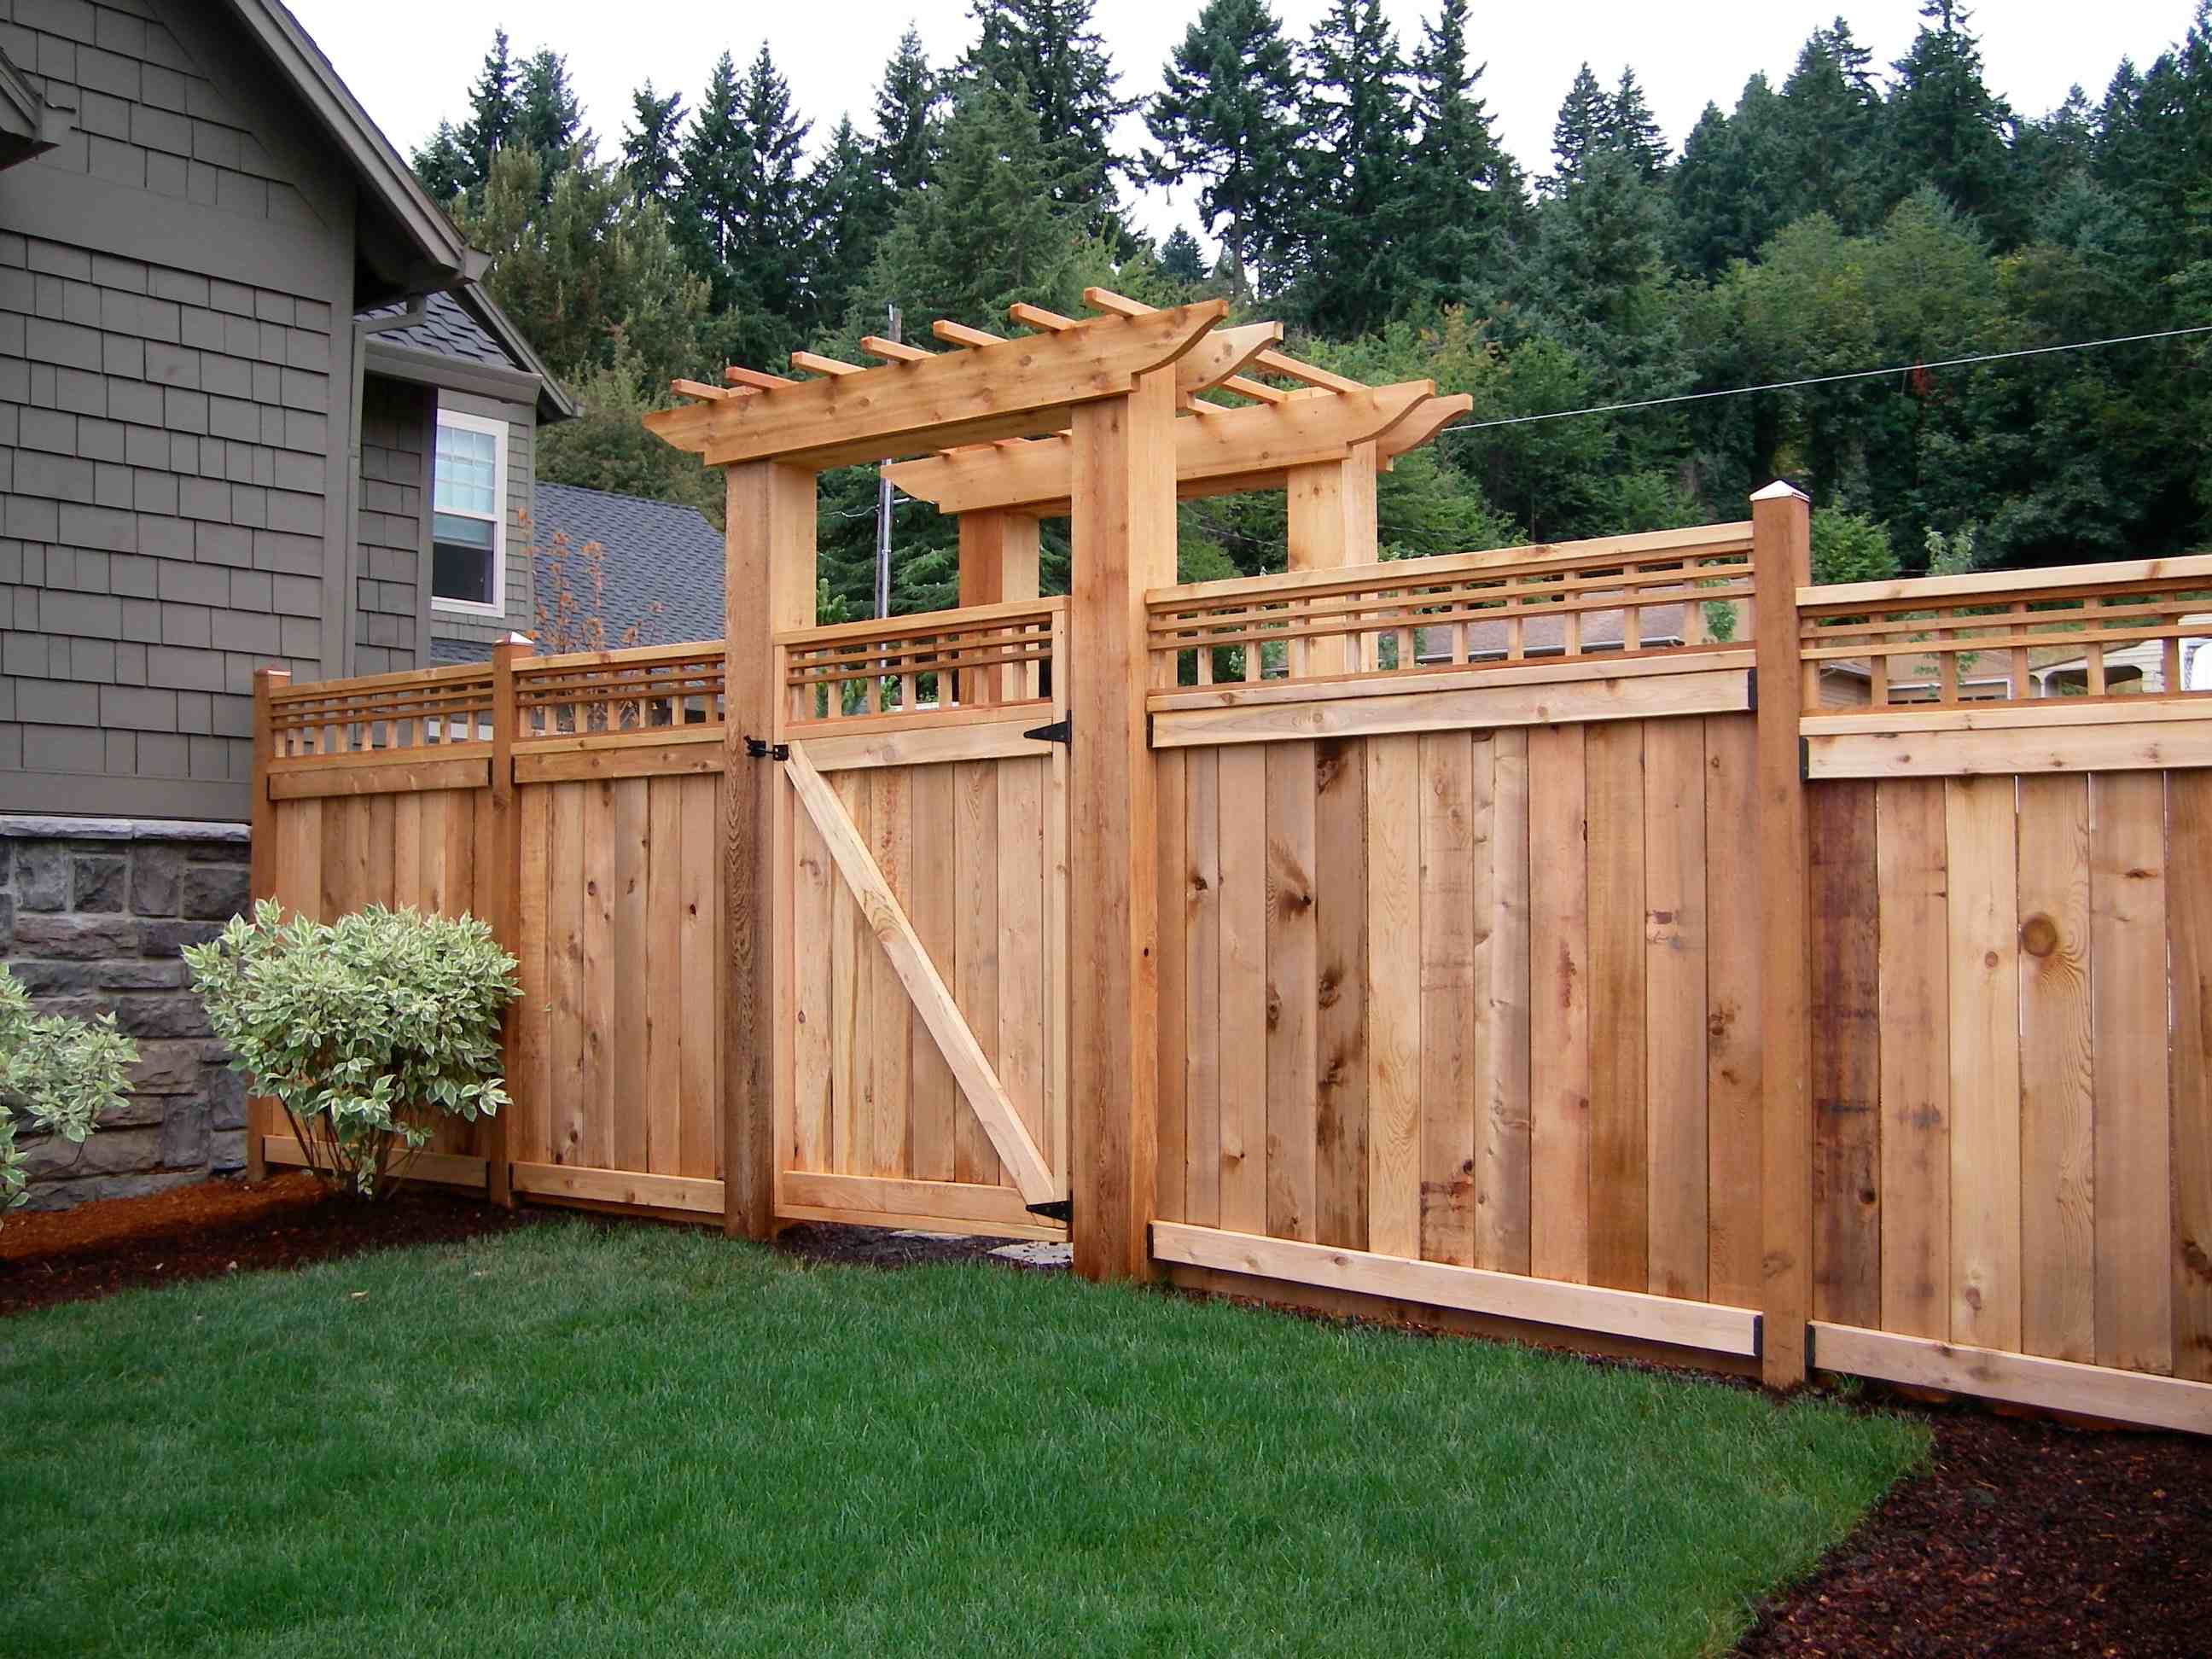 Wood Fences | Fence Geeks | Wrought Iron Fences, Gates, and Access Controls